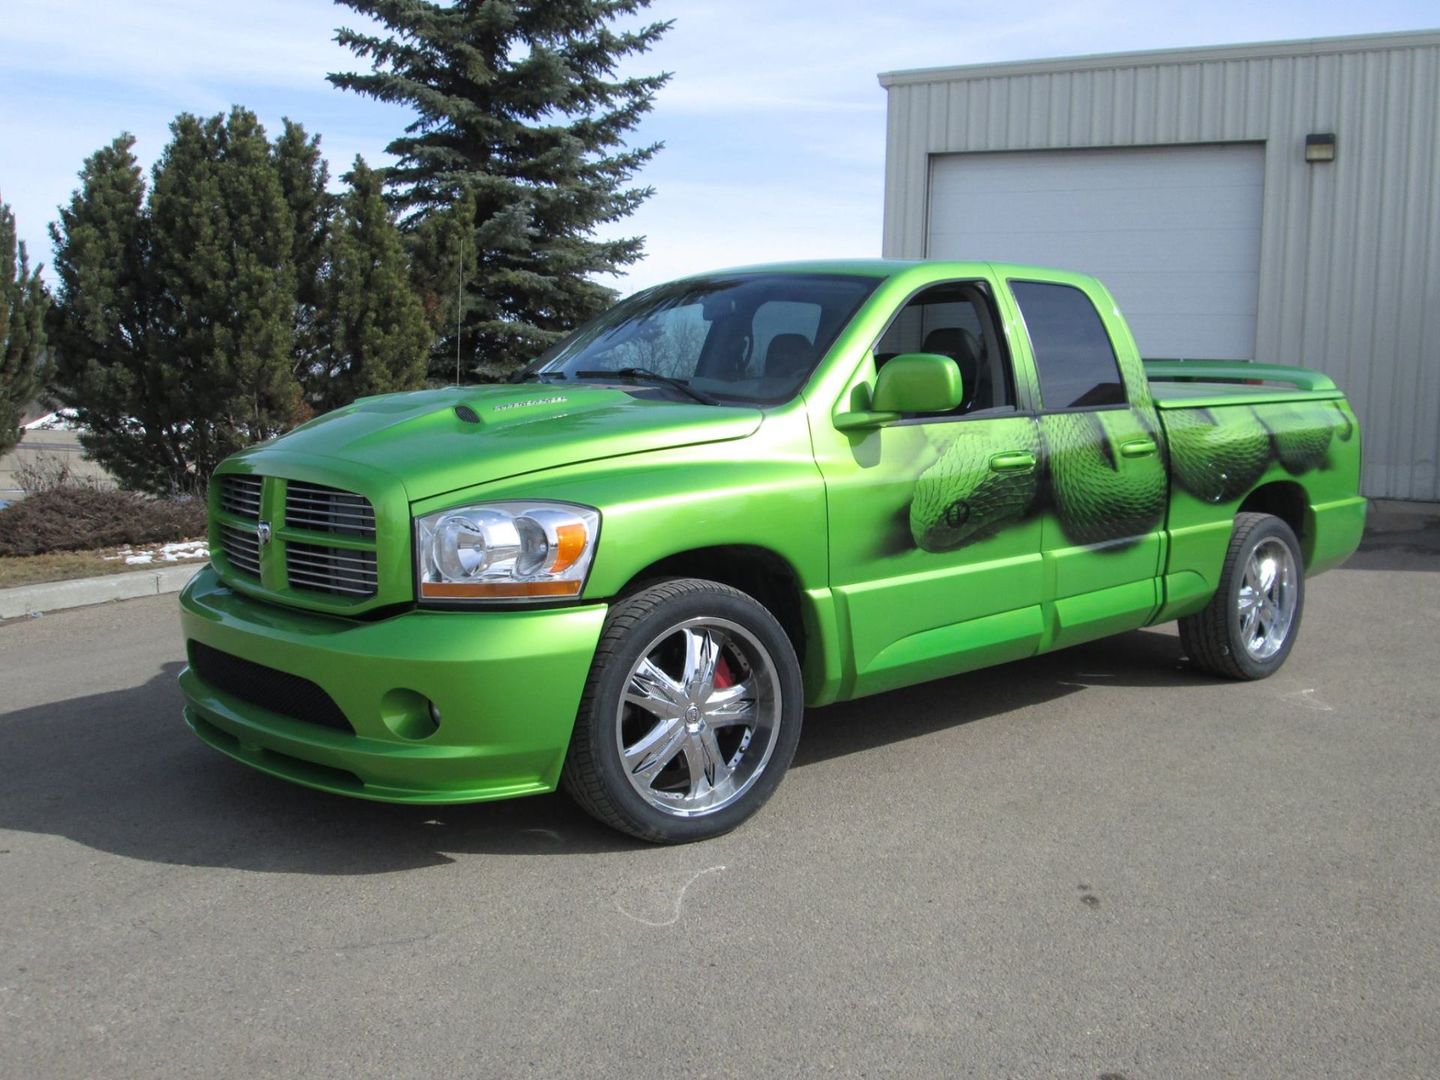 large lime green ram truck with body work and custom paint job